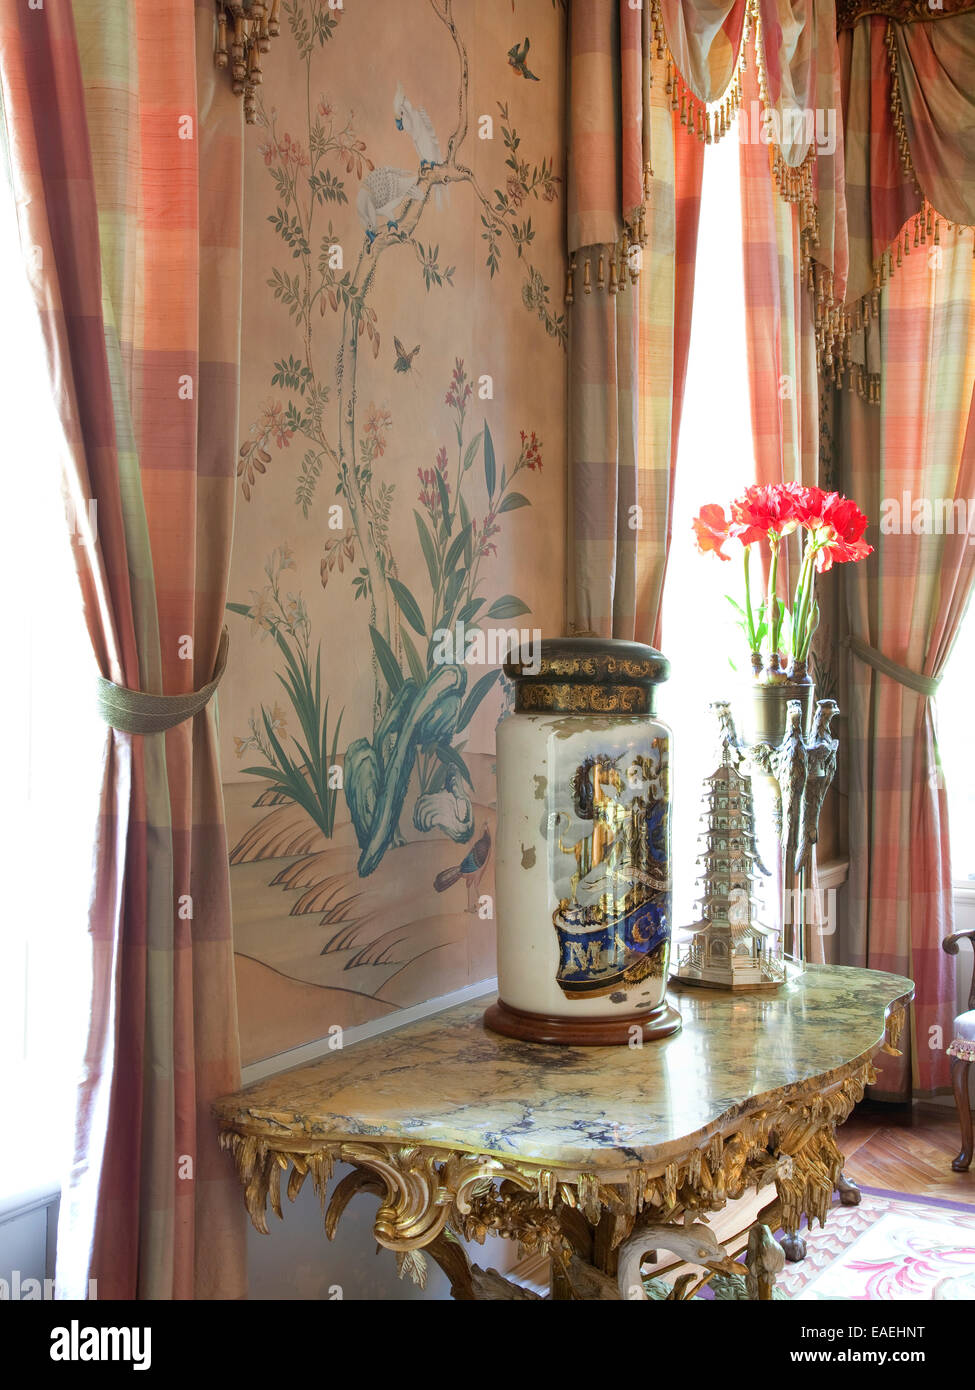 detail of side table in dining room of Swan House, Atlanta, Georgia. Stock Photo